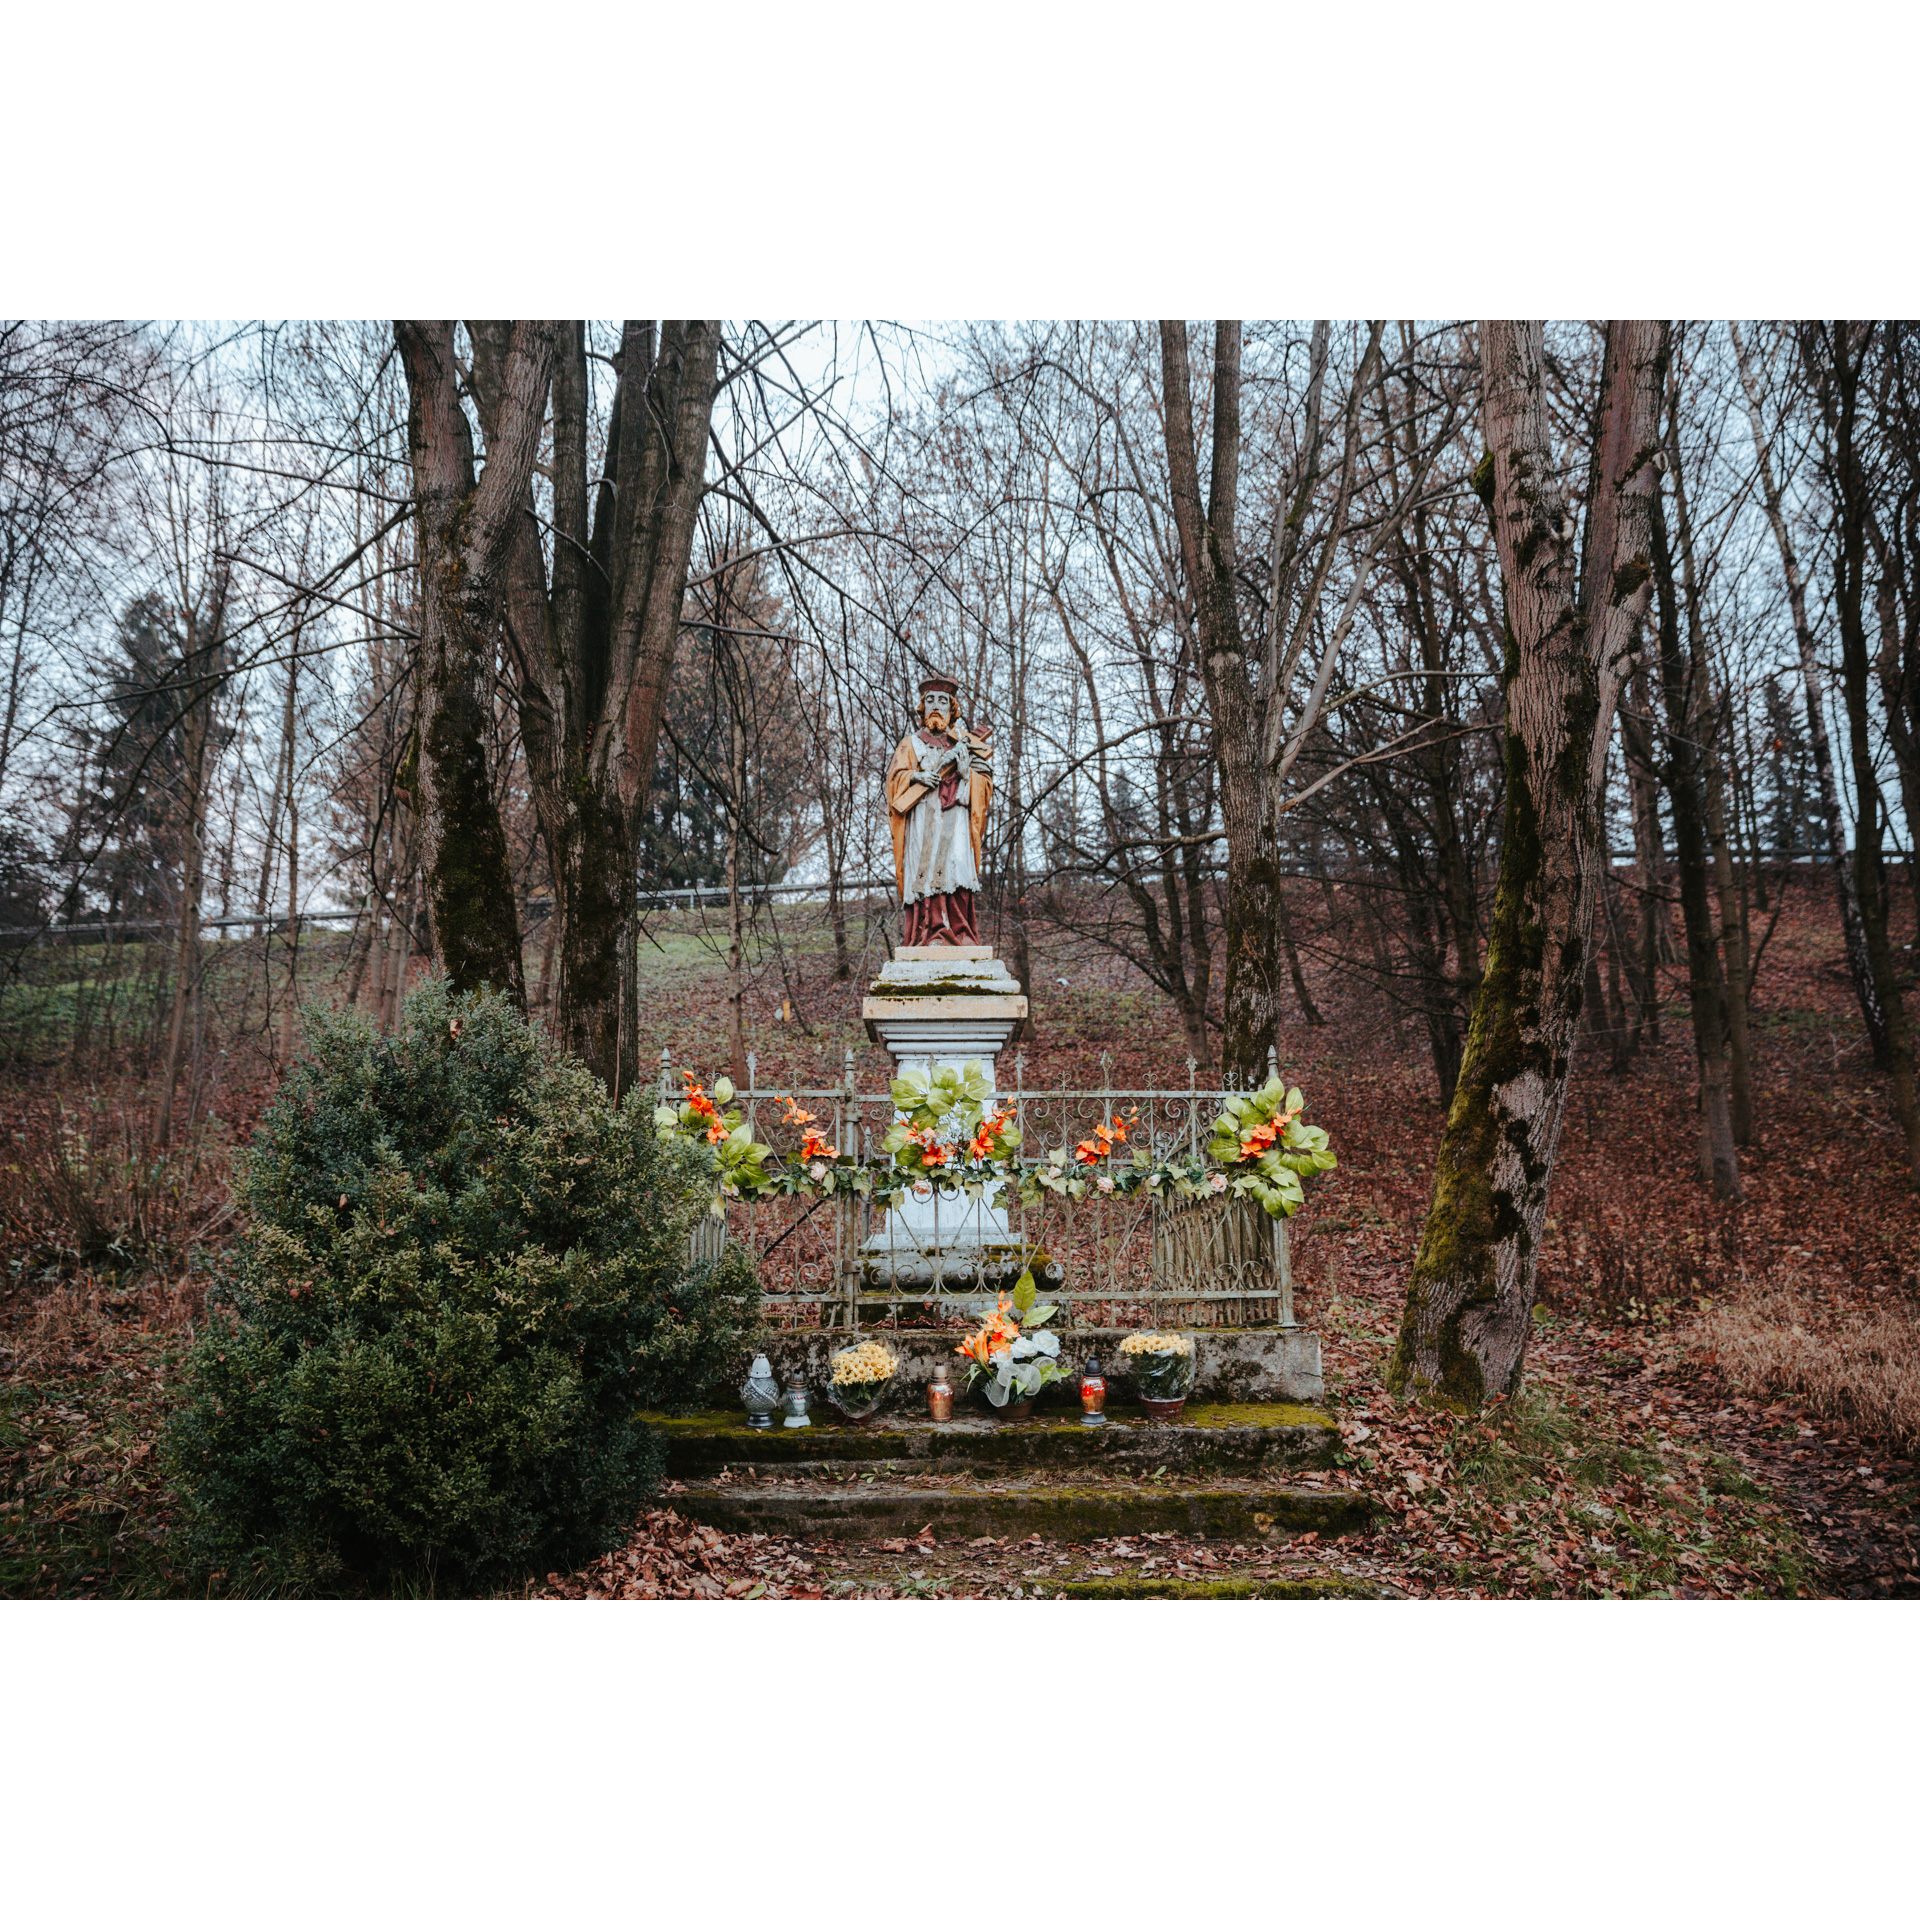 A shrine with a statue of a saint in a forest surrounded by a metal railing and colorful flowers